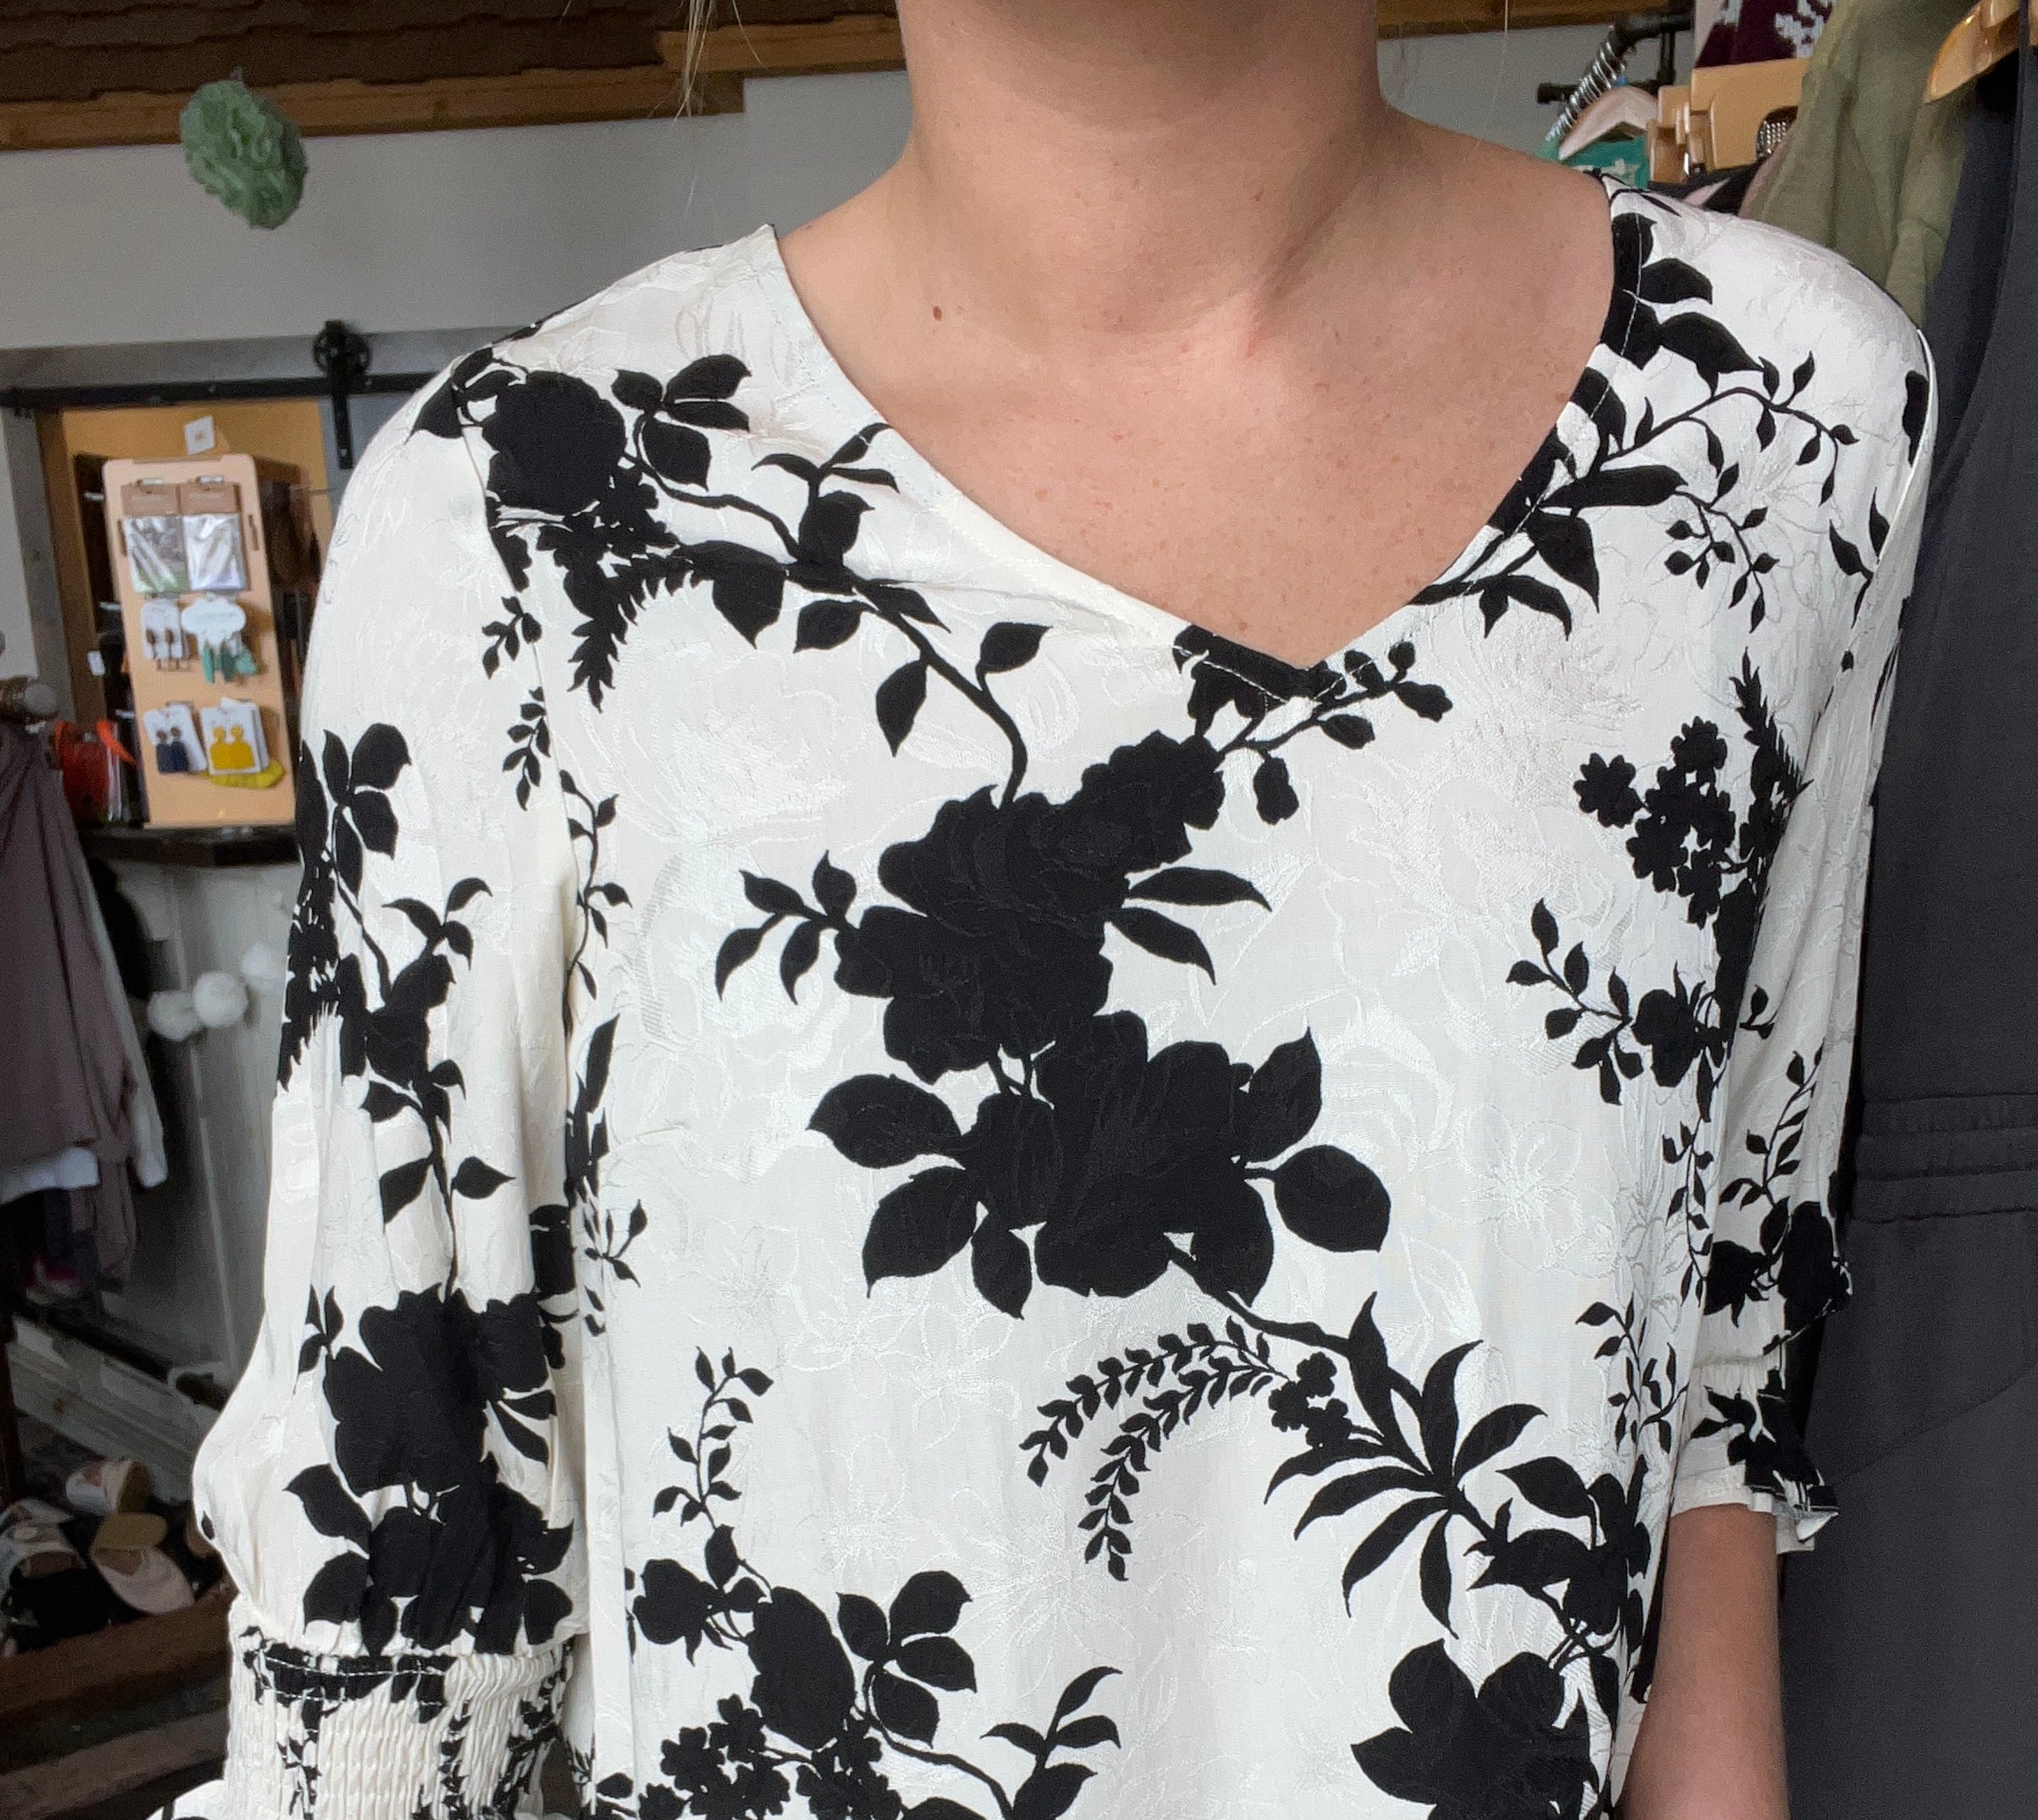 Bea Floral Blouse-Short Sleeves-The Funky Zebra Ames-The Funky Zebra Ames, Women's Fashion Boutique in Ames, Iowa